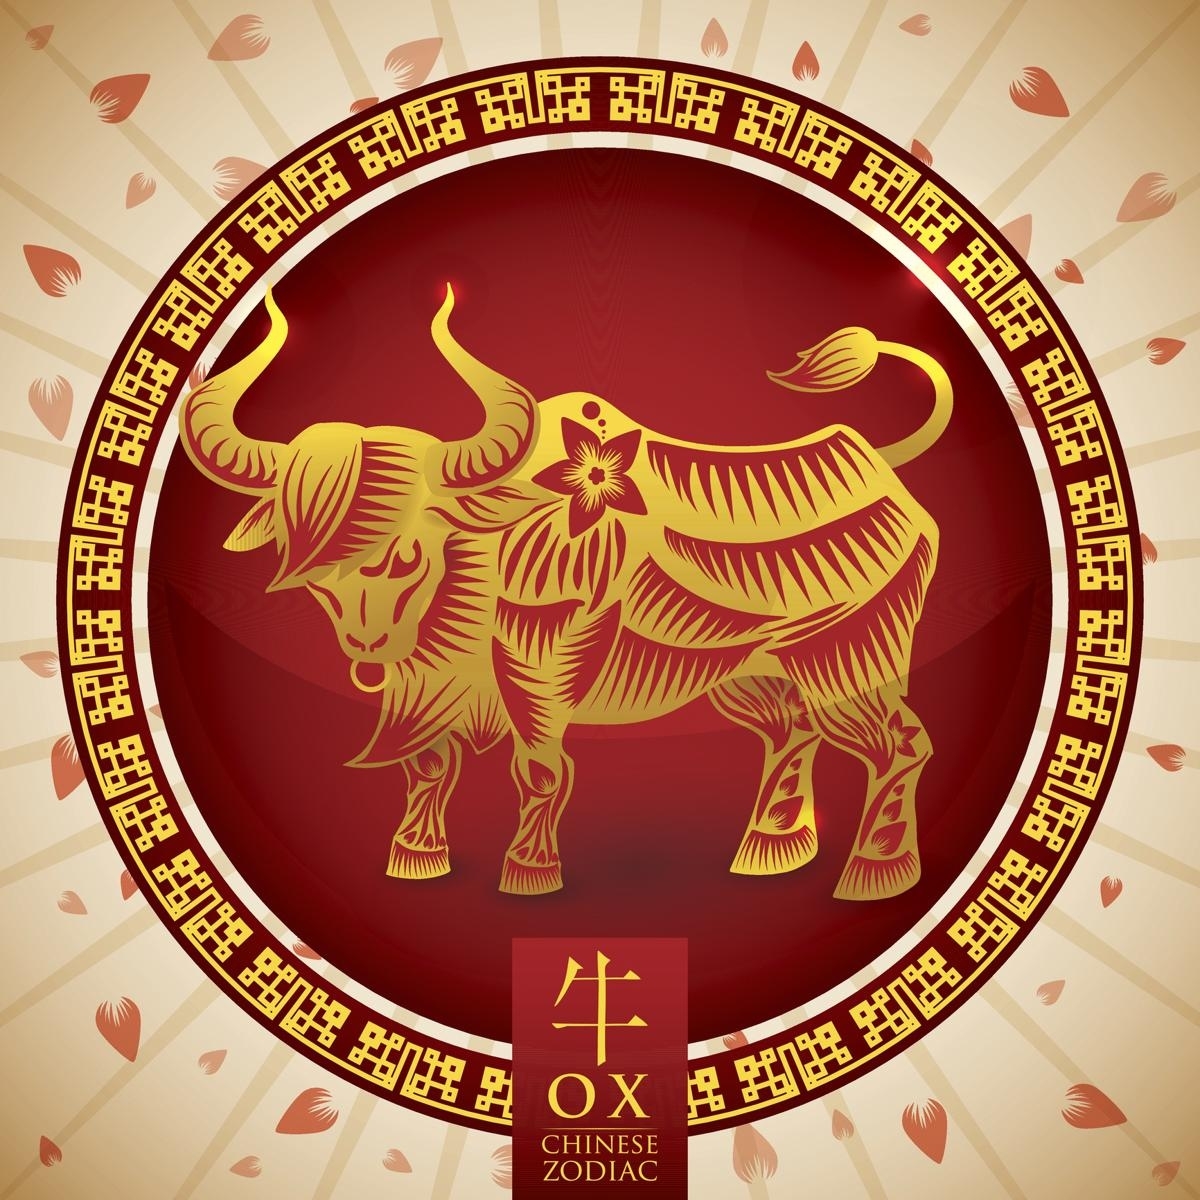 Detailed Information About The Chinese Zodiac Symbols And Chinese Zodiac Calendar Ox